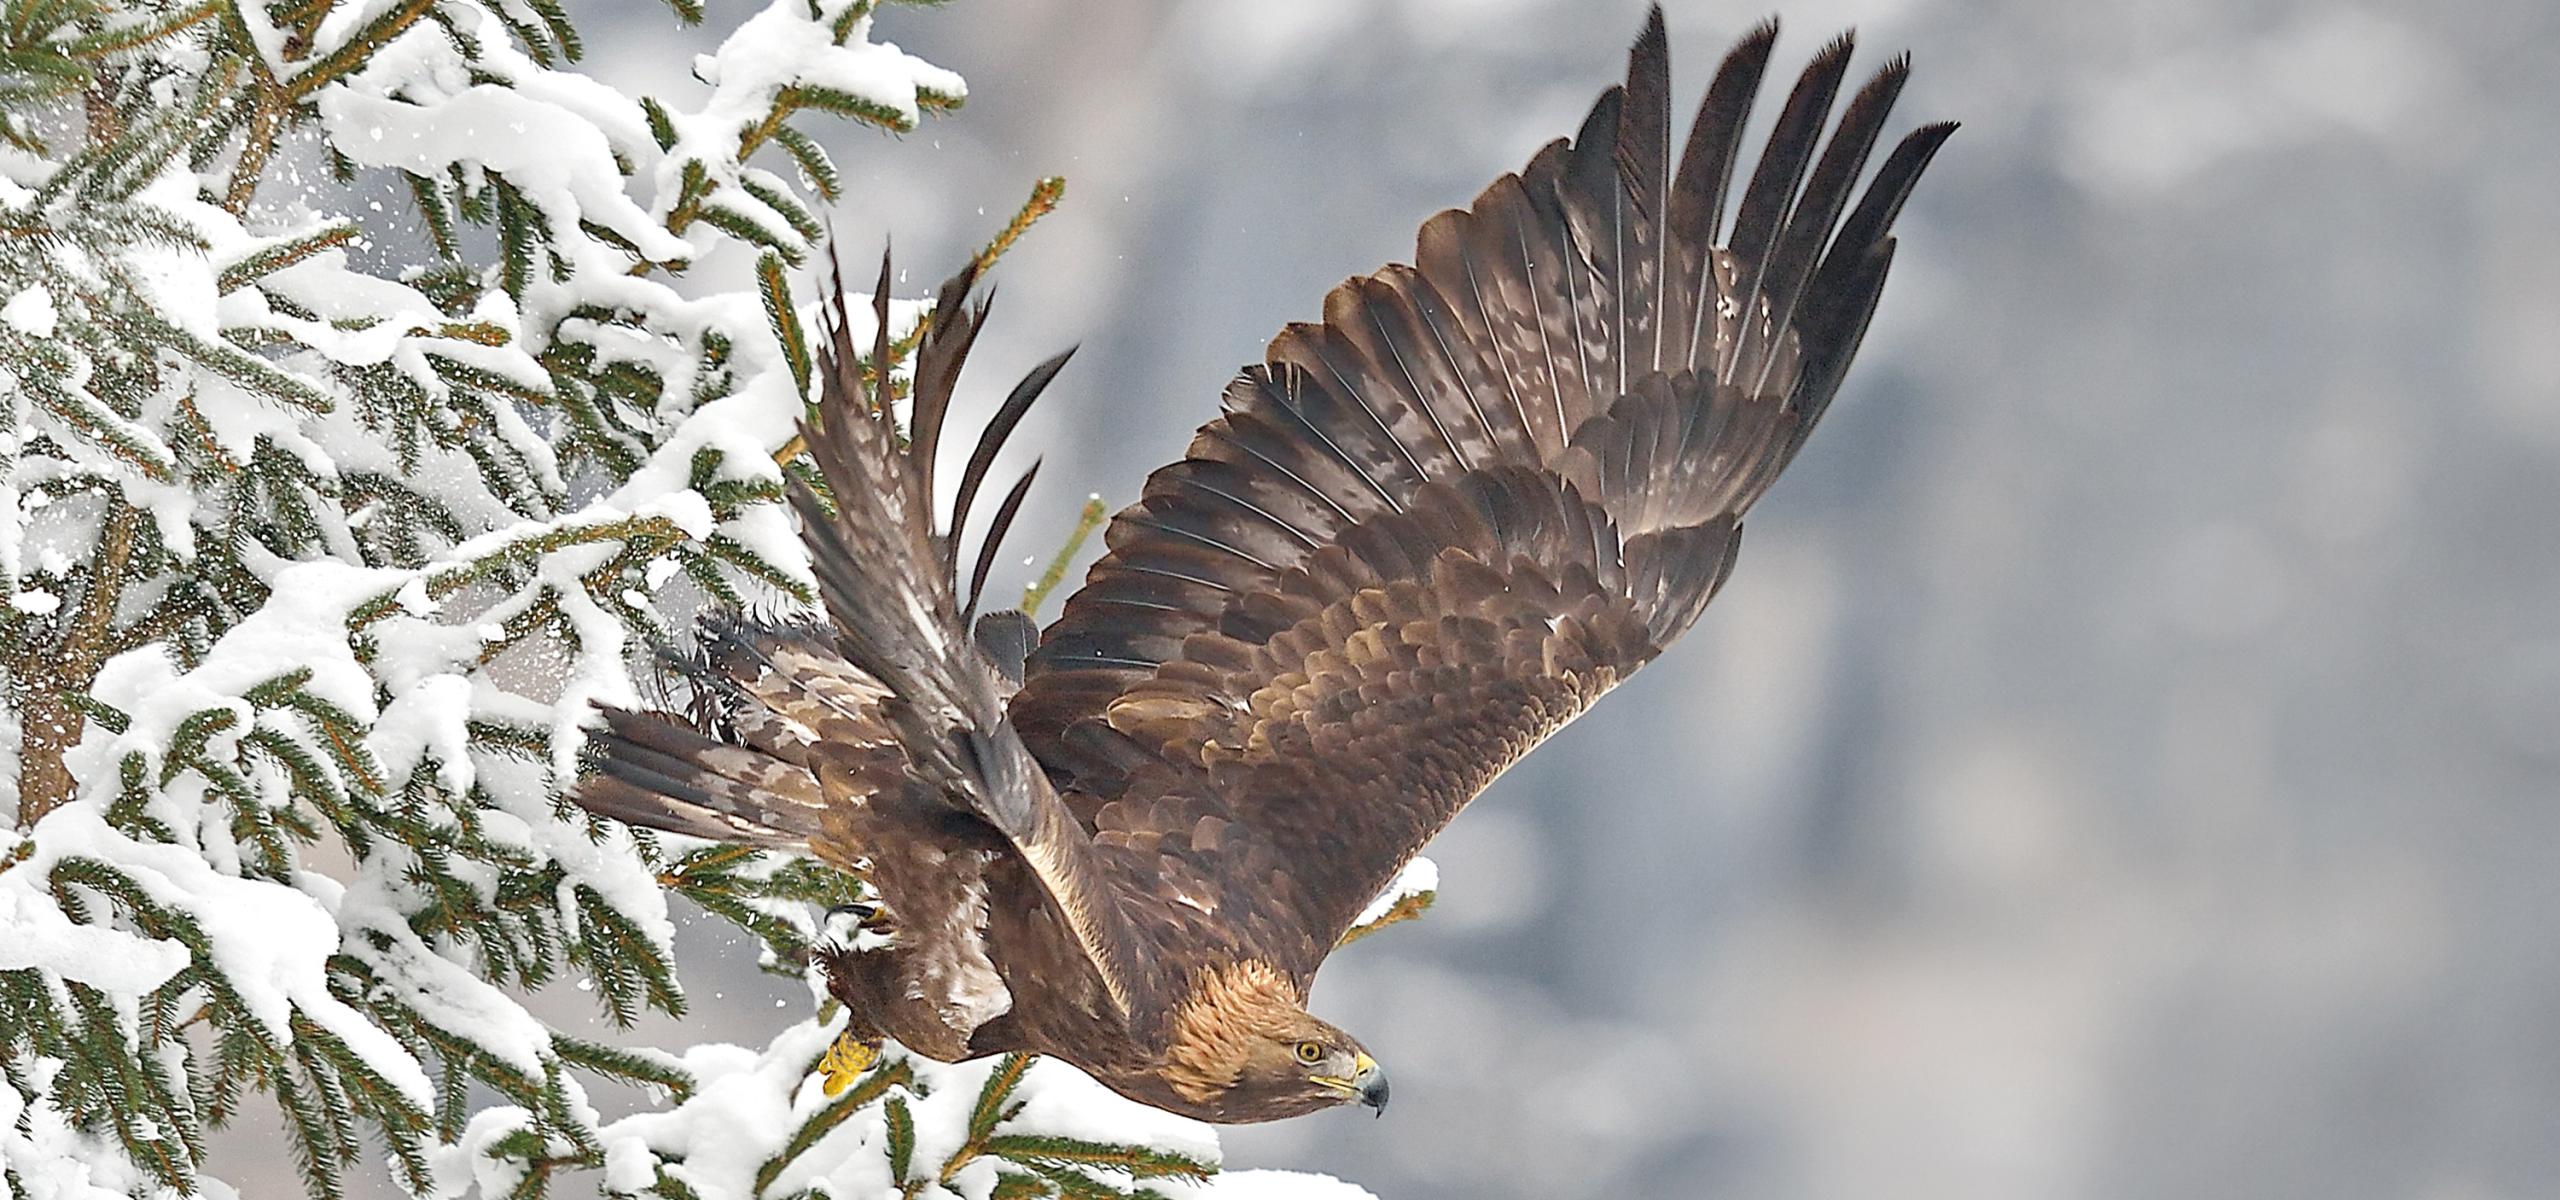 Golden eagle takes off from a spruce covered in snow